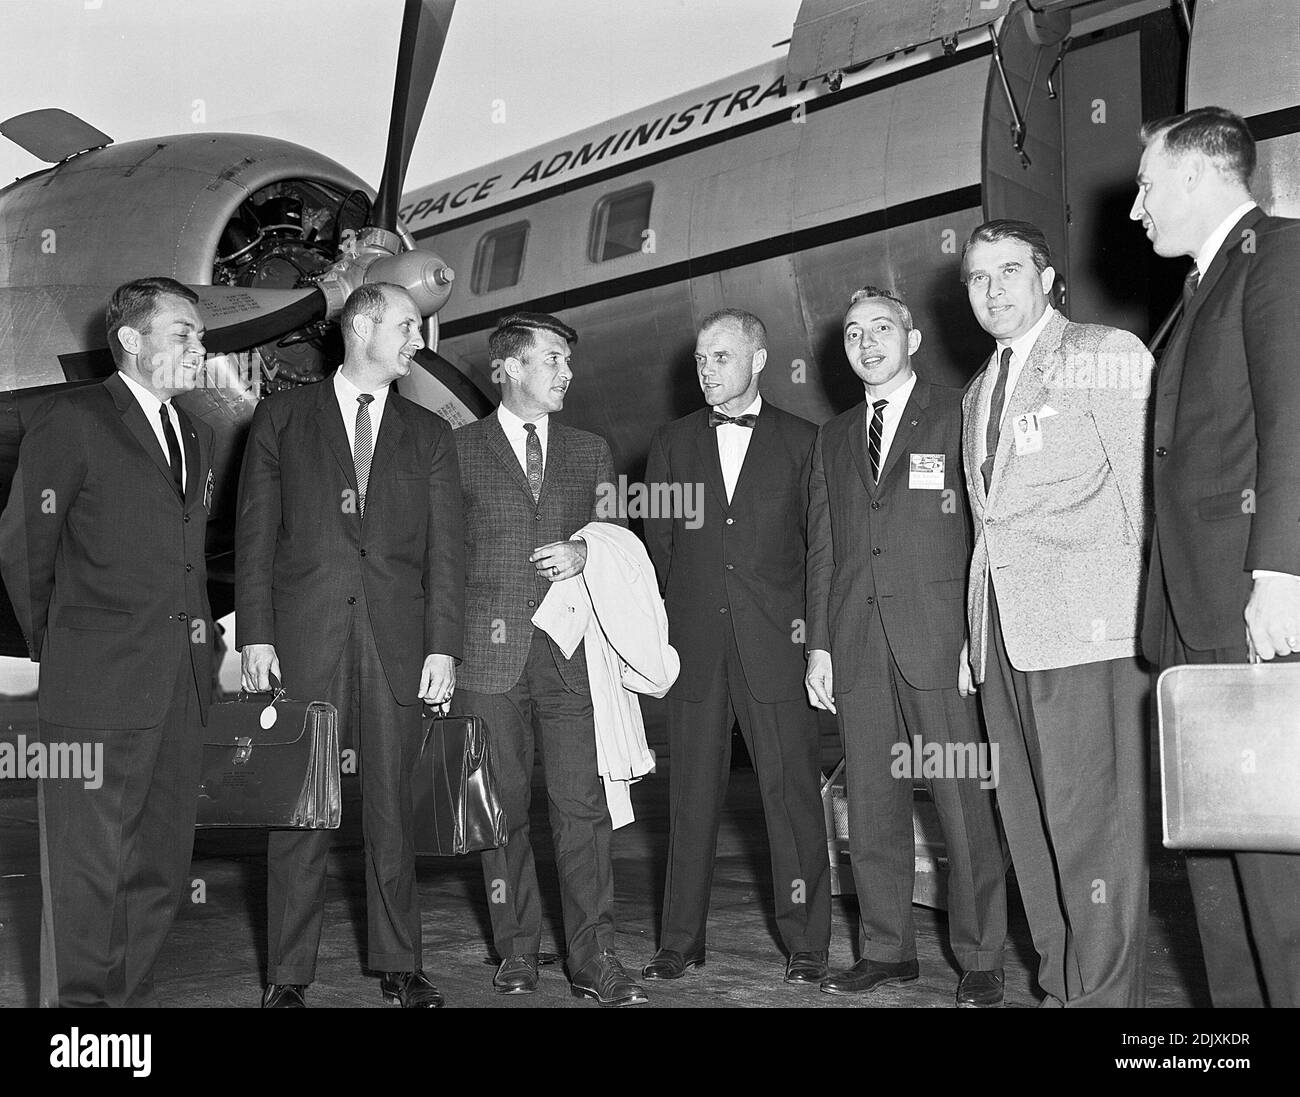 Officials from NASA Headquarters and the astronauts often met with Dr. Wernher von Braun in Huntsville, Alabama. This photograph was taken in September 1962 during one such visit. From left to right are Elliot See, Tom Stafford, Wally Schirra, John Glenn, Brainerd Holmes, Dr. von Braun, and Jim Lovell. Photo by NASA via CNP/ABACAPRESS.COM Stock Photo